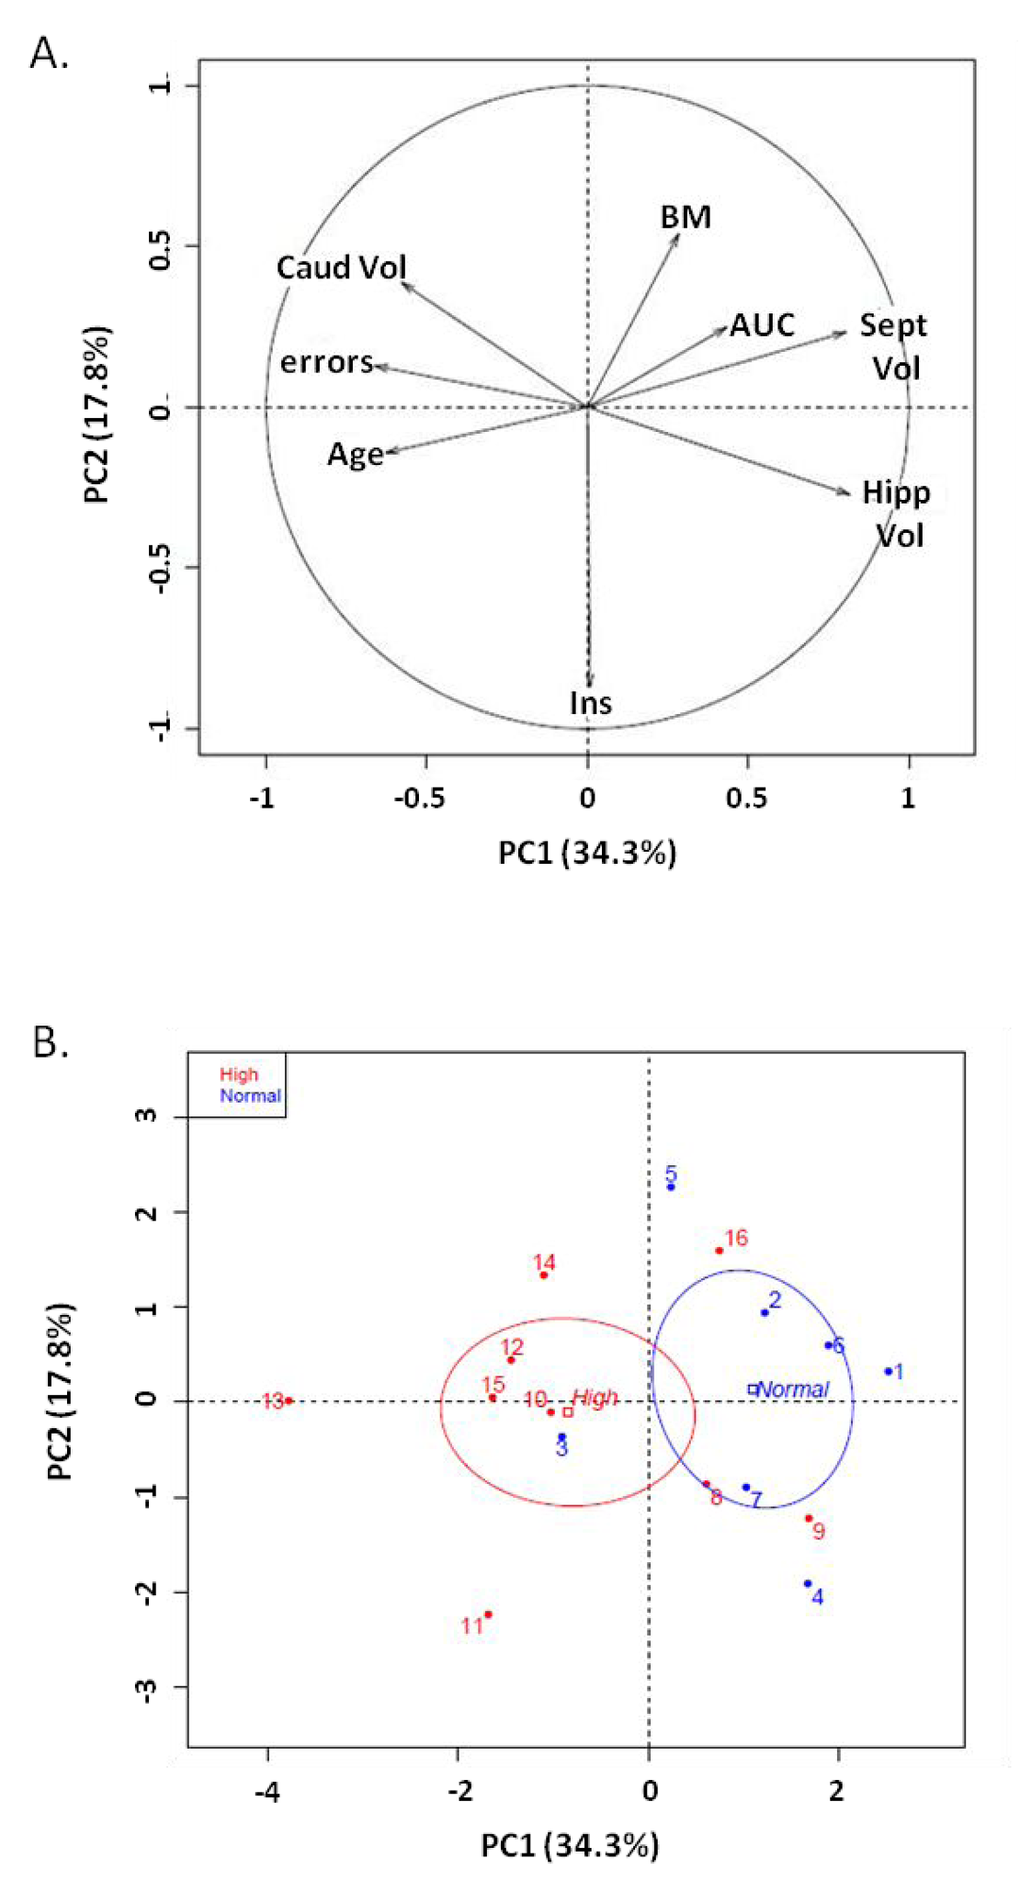 Principal Component Analysis on middle-aged animals. (A) Variable factor map. Fasting blood glucose was considered as the qualitative variable on age, body mass (BM), number of errors (errors), volumes of hippocampus (Hipp Vol), septum (Sept Vol) and caudate nucleus (Caud Vol), insulin (Ins) and glucose tolerance index (OGTT-AUC) (B) Individual dispersion of PCA: x-axis: principal component 1 (PC1: 34.3%), y axis: principal component 2 (PC2: 17.8%). A threshold of 4 mmol/L defined normal blood glucose (fasting glucose less than 4 mmol/L, blue) and high blood glucose (fasting glucose more than 4 mmol/L, red).